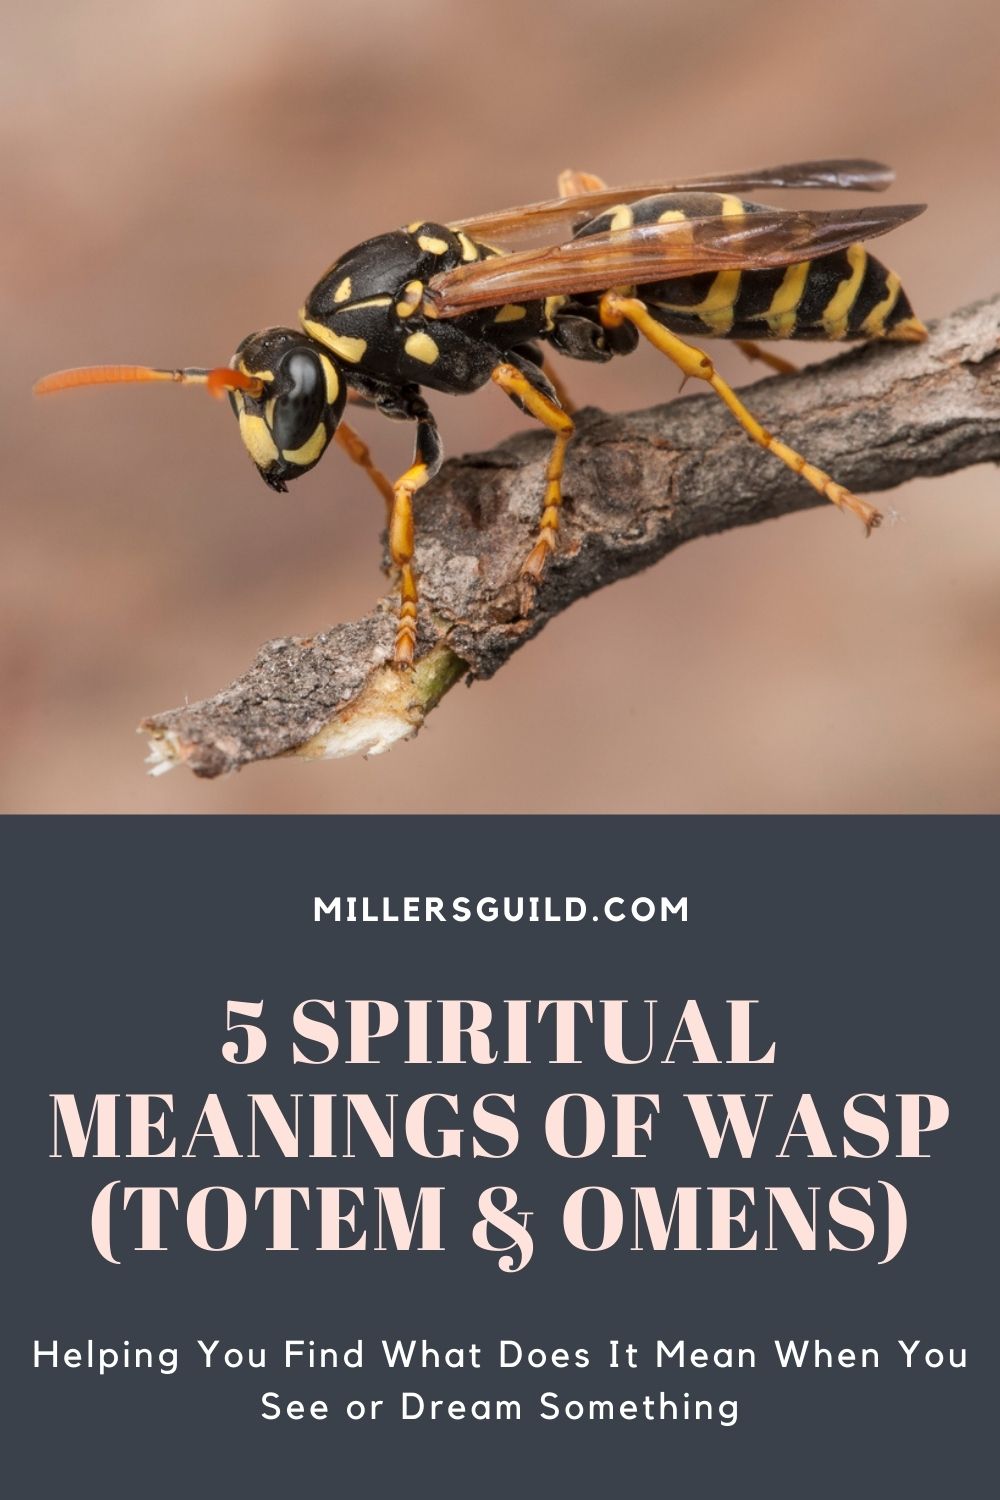 5 Spiritual Meanings of Wasp (Totem & Omens) 1